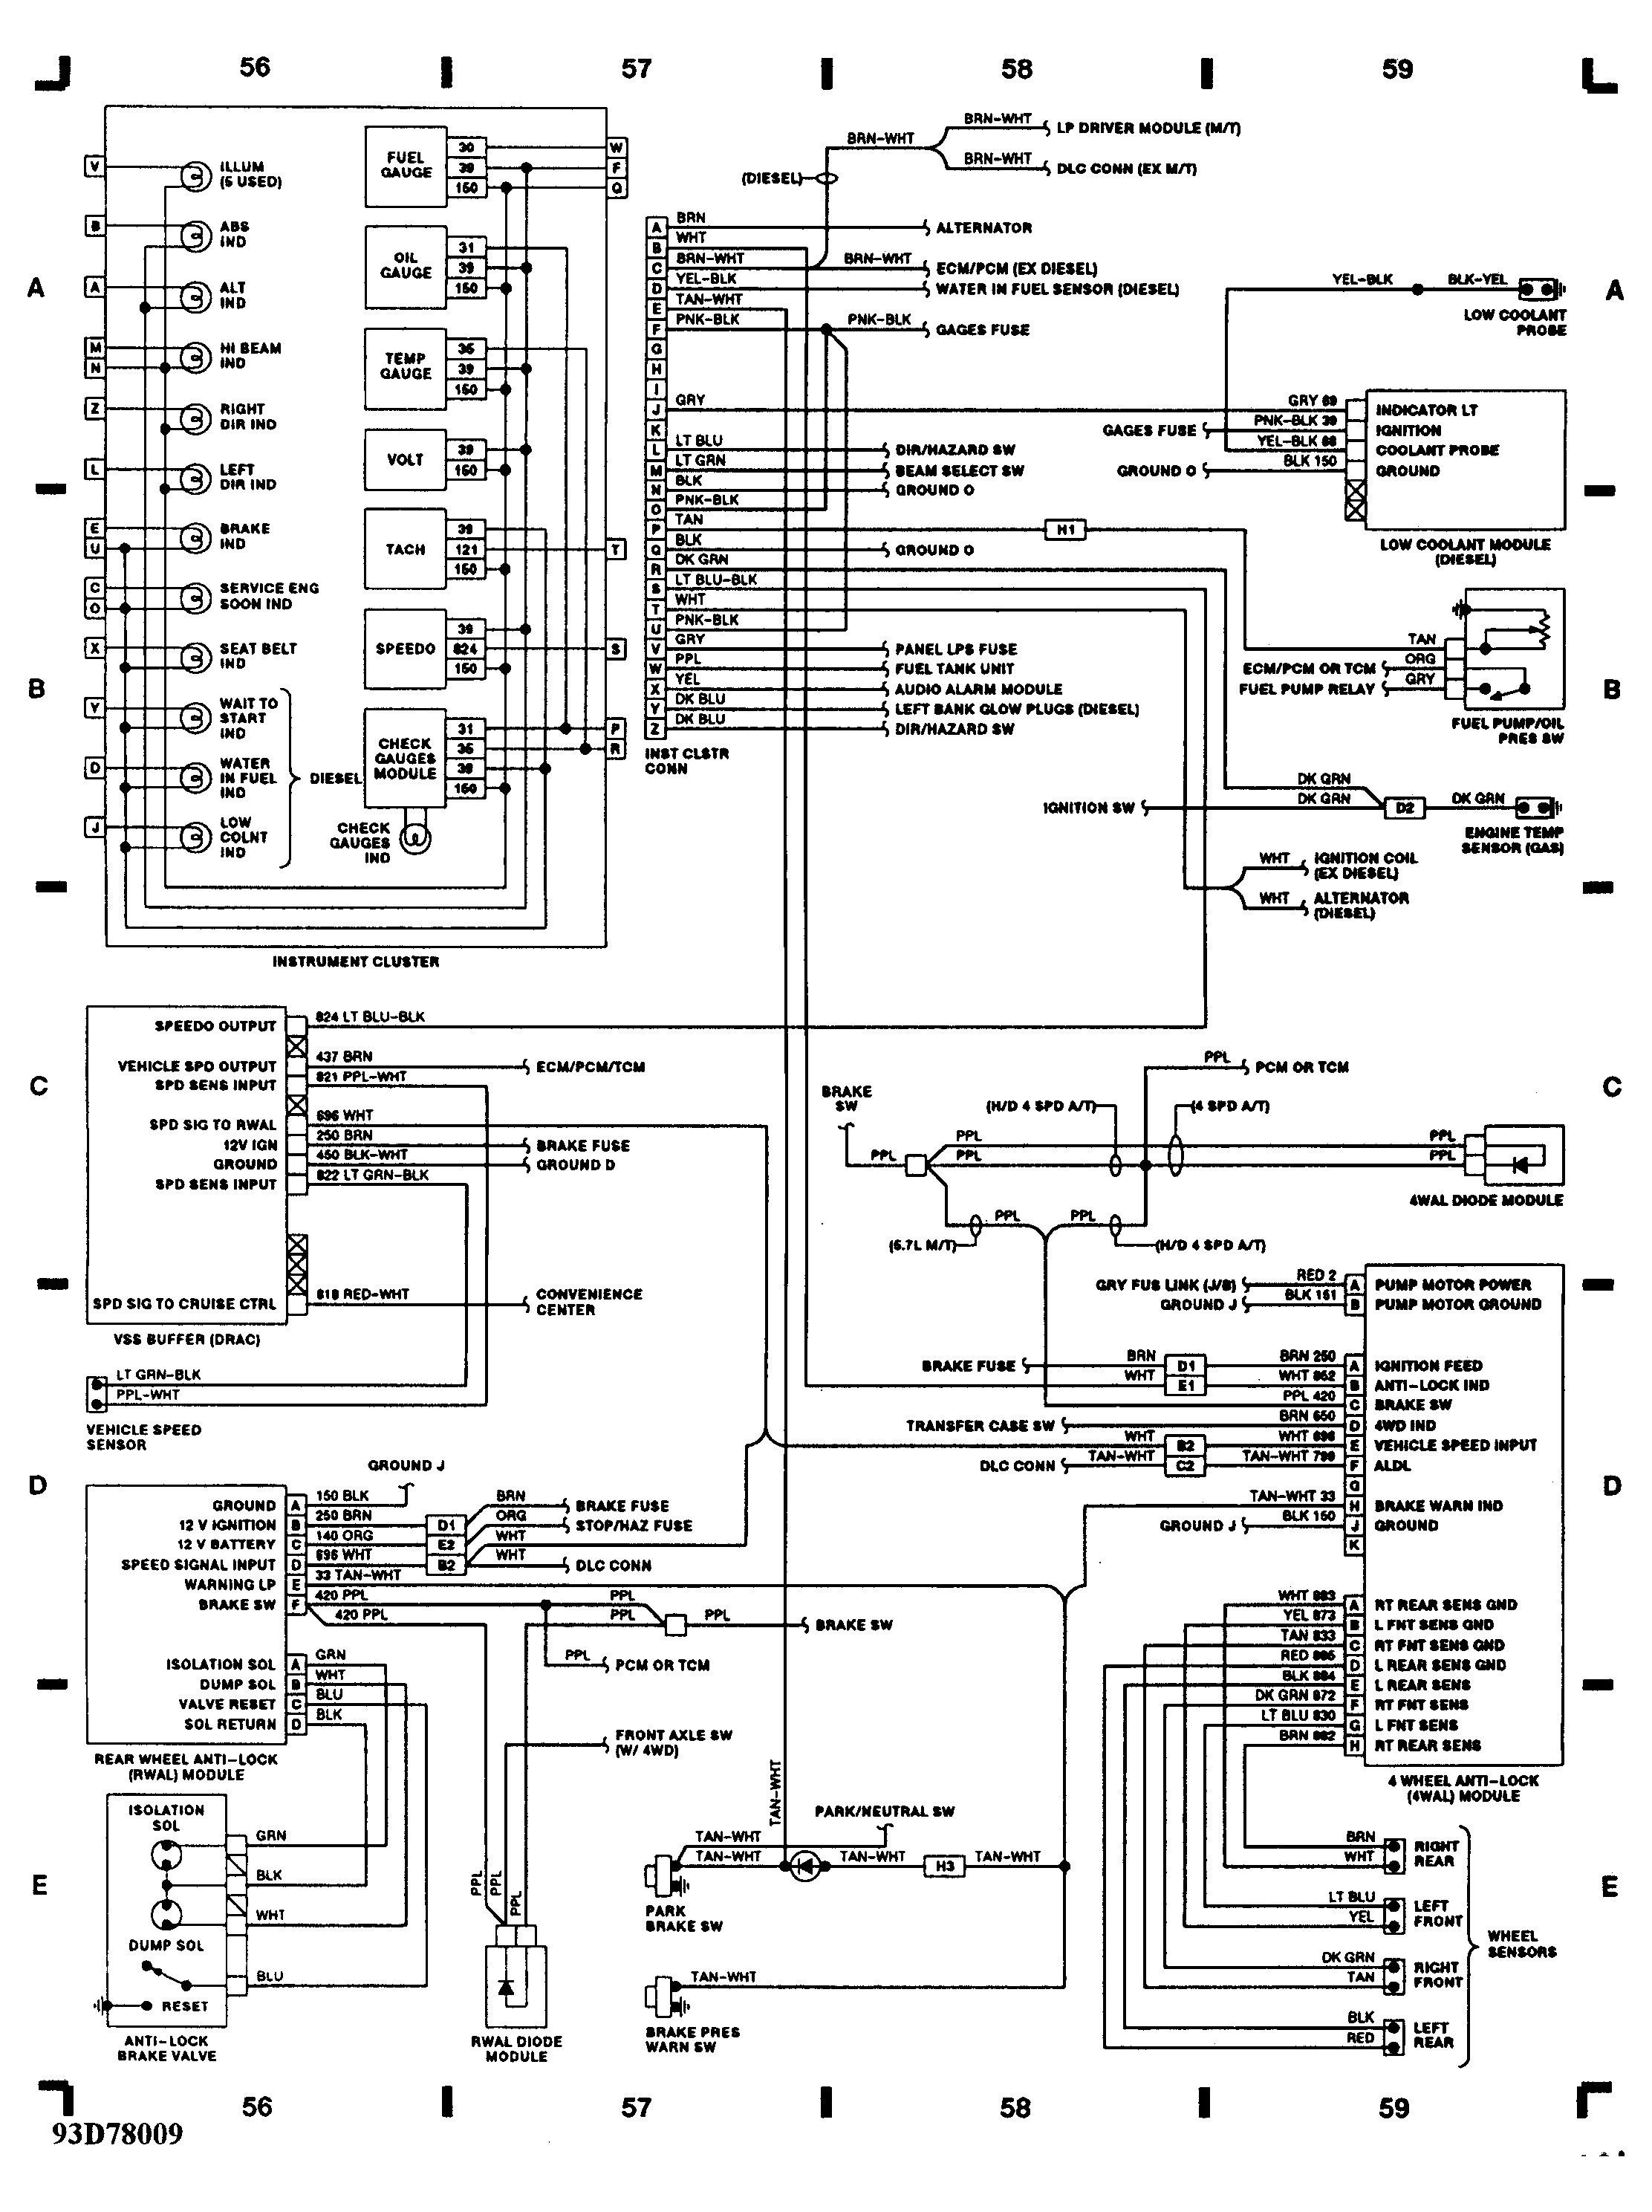 Wiring Diagram For Chevy Cobalt